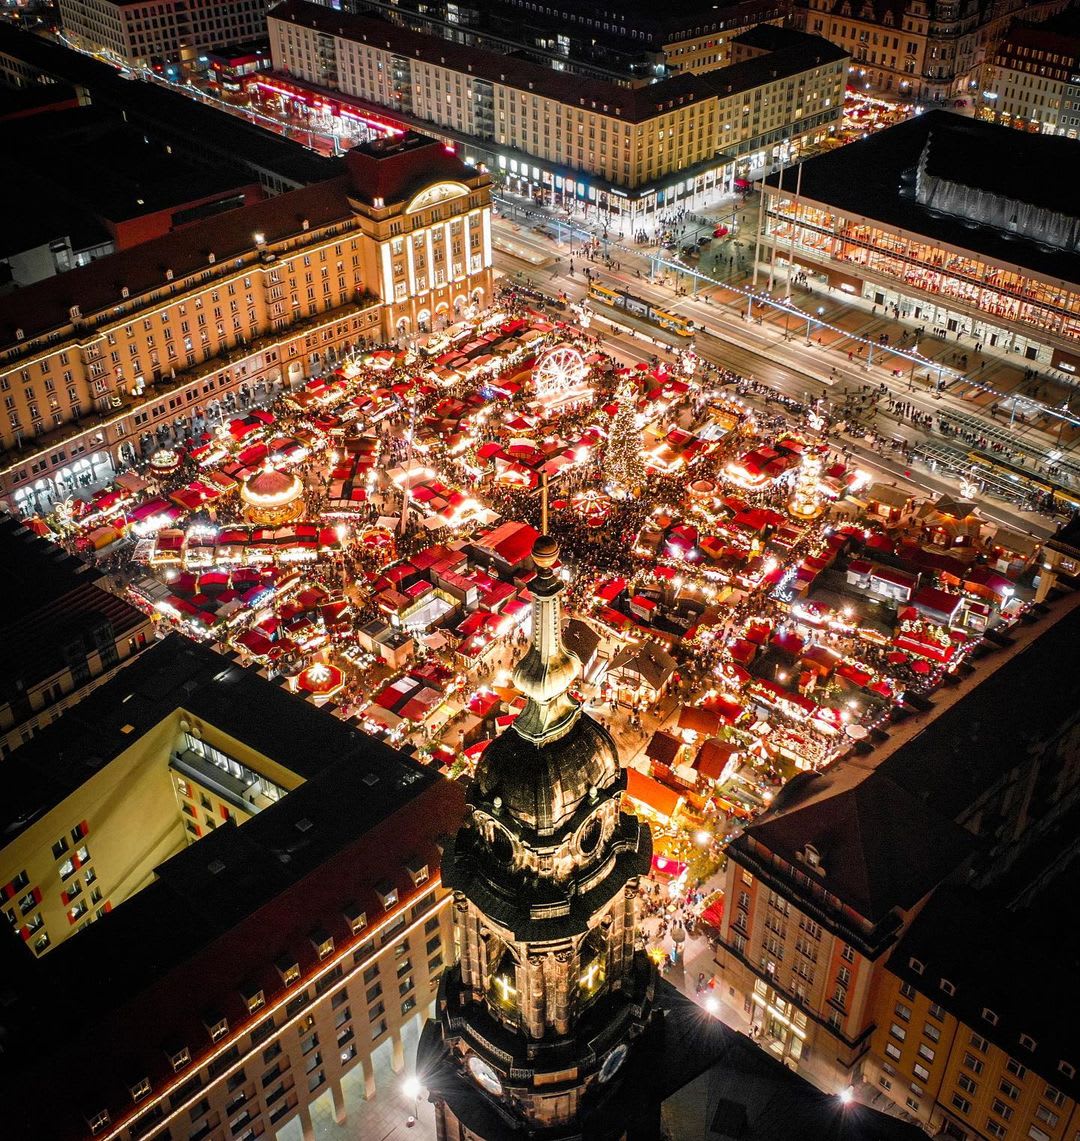 Christmas Market held last year at the Altmarkt Square in Dresden, Saxony, Germany